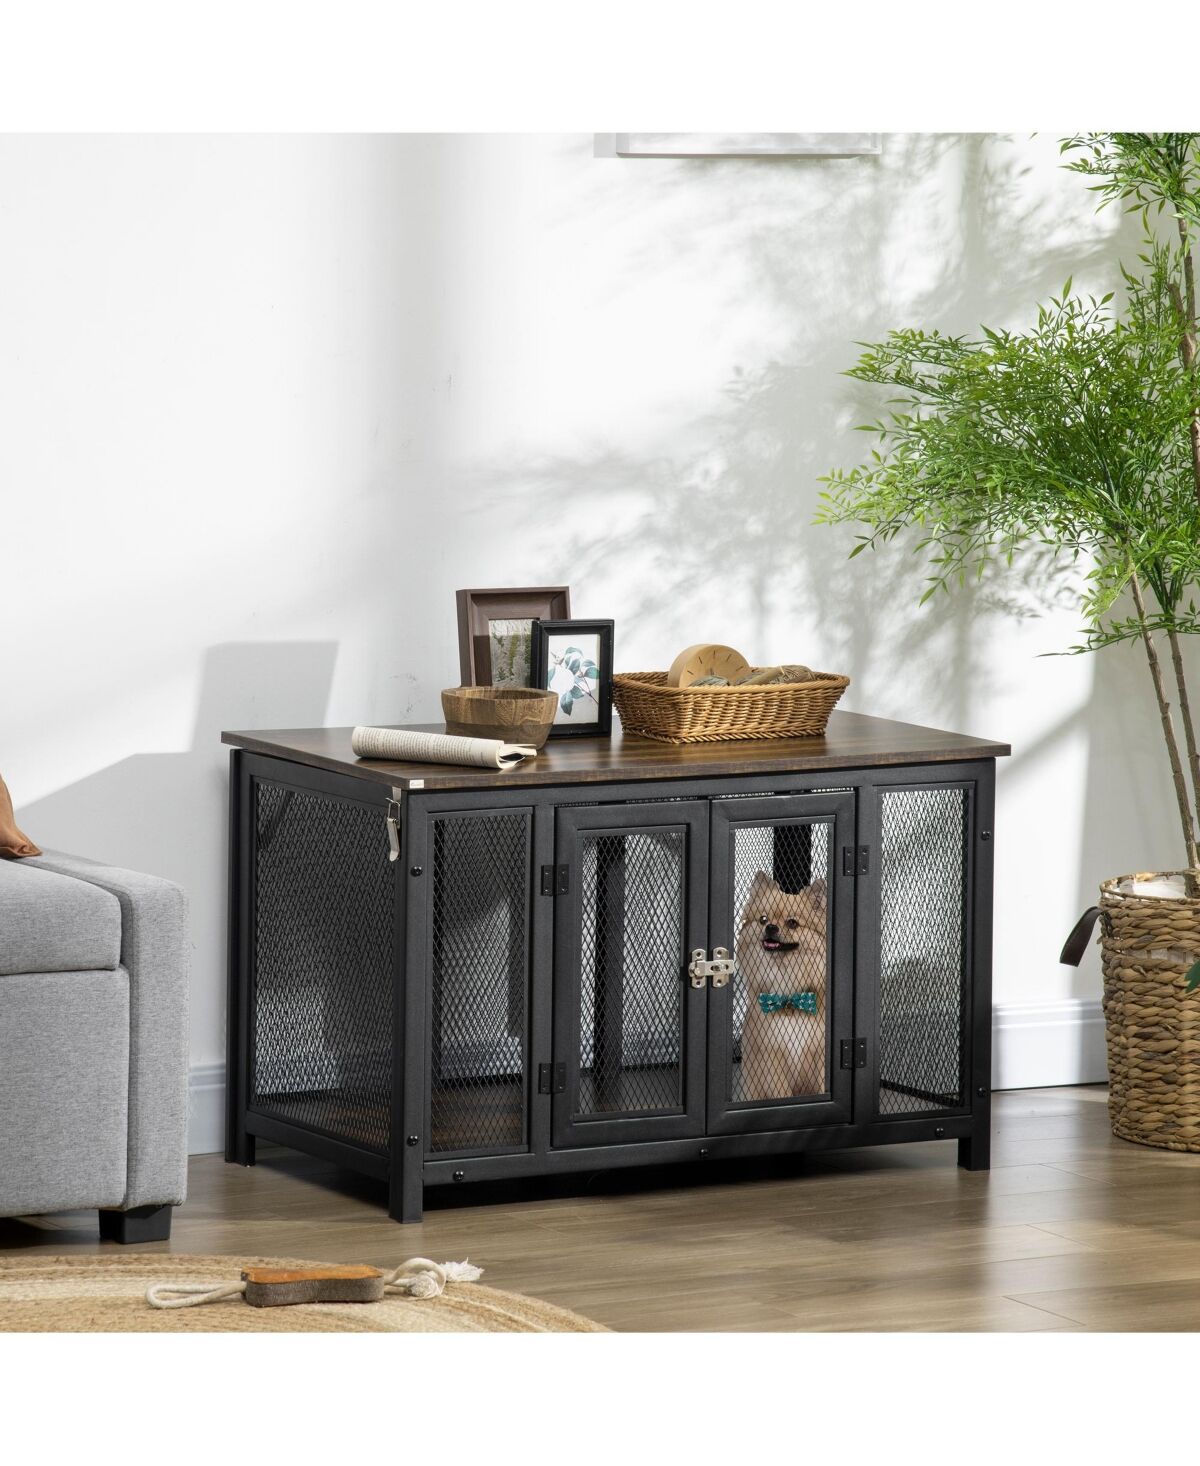 PawHut Furniture Style Dog Crate with Openable Top, Big Dog Crate End Table, Puppy Crate for Medium Dogs Indoor, Spacious Interior, Pet Kennel, Brown,